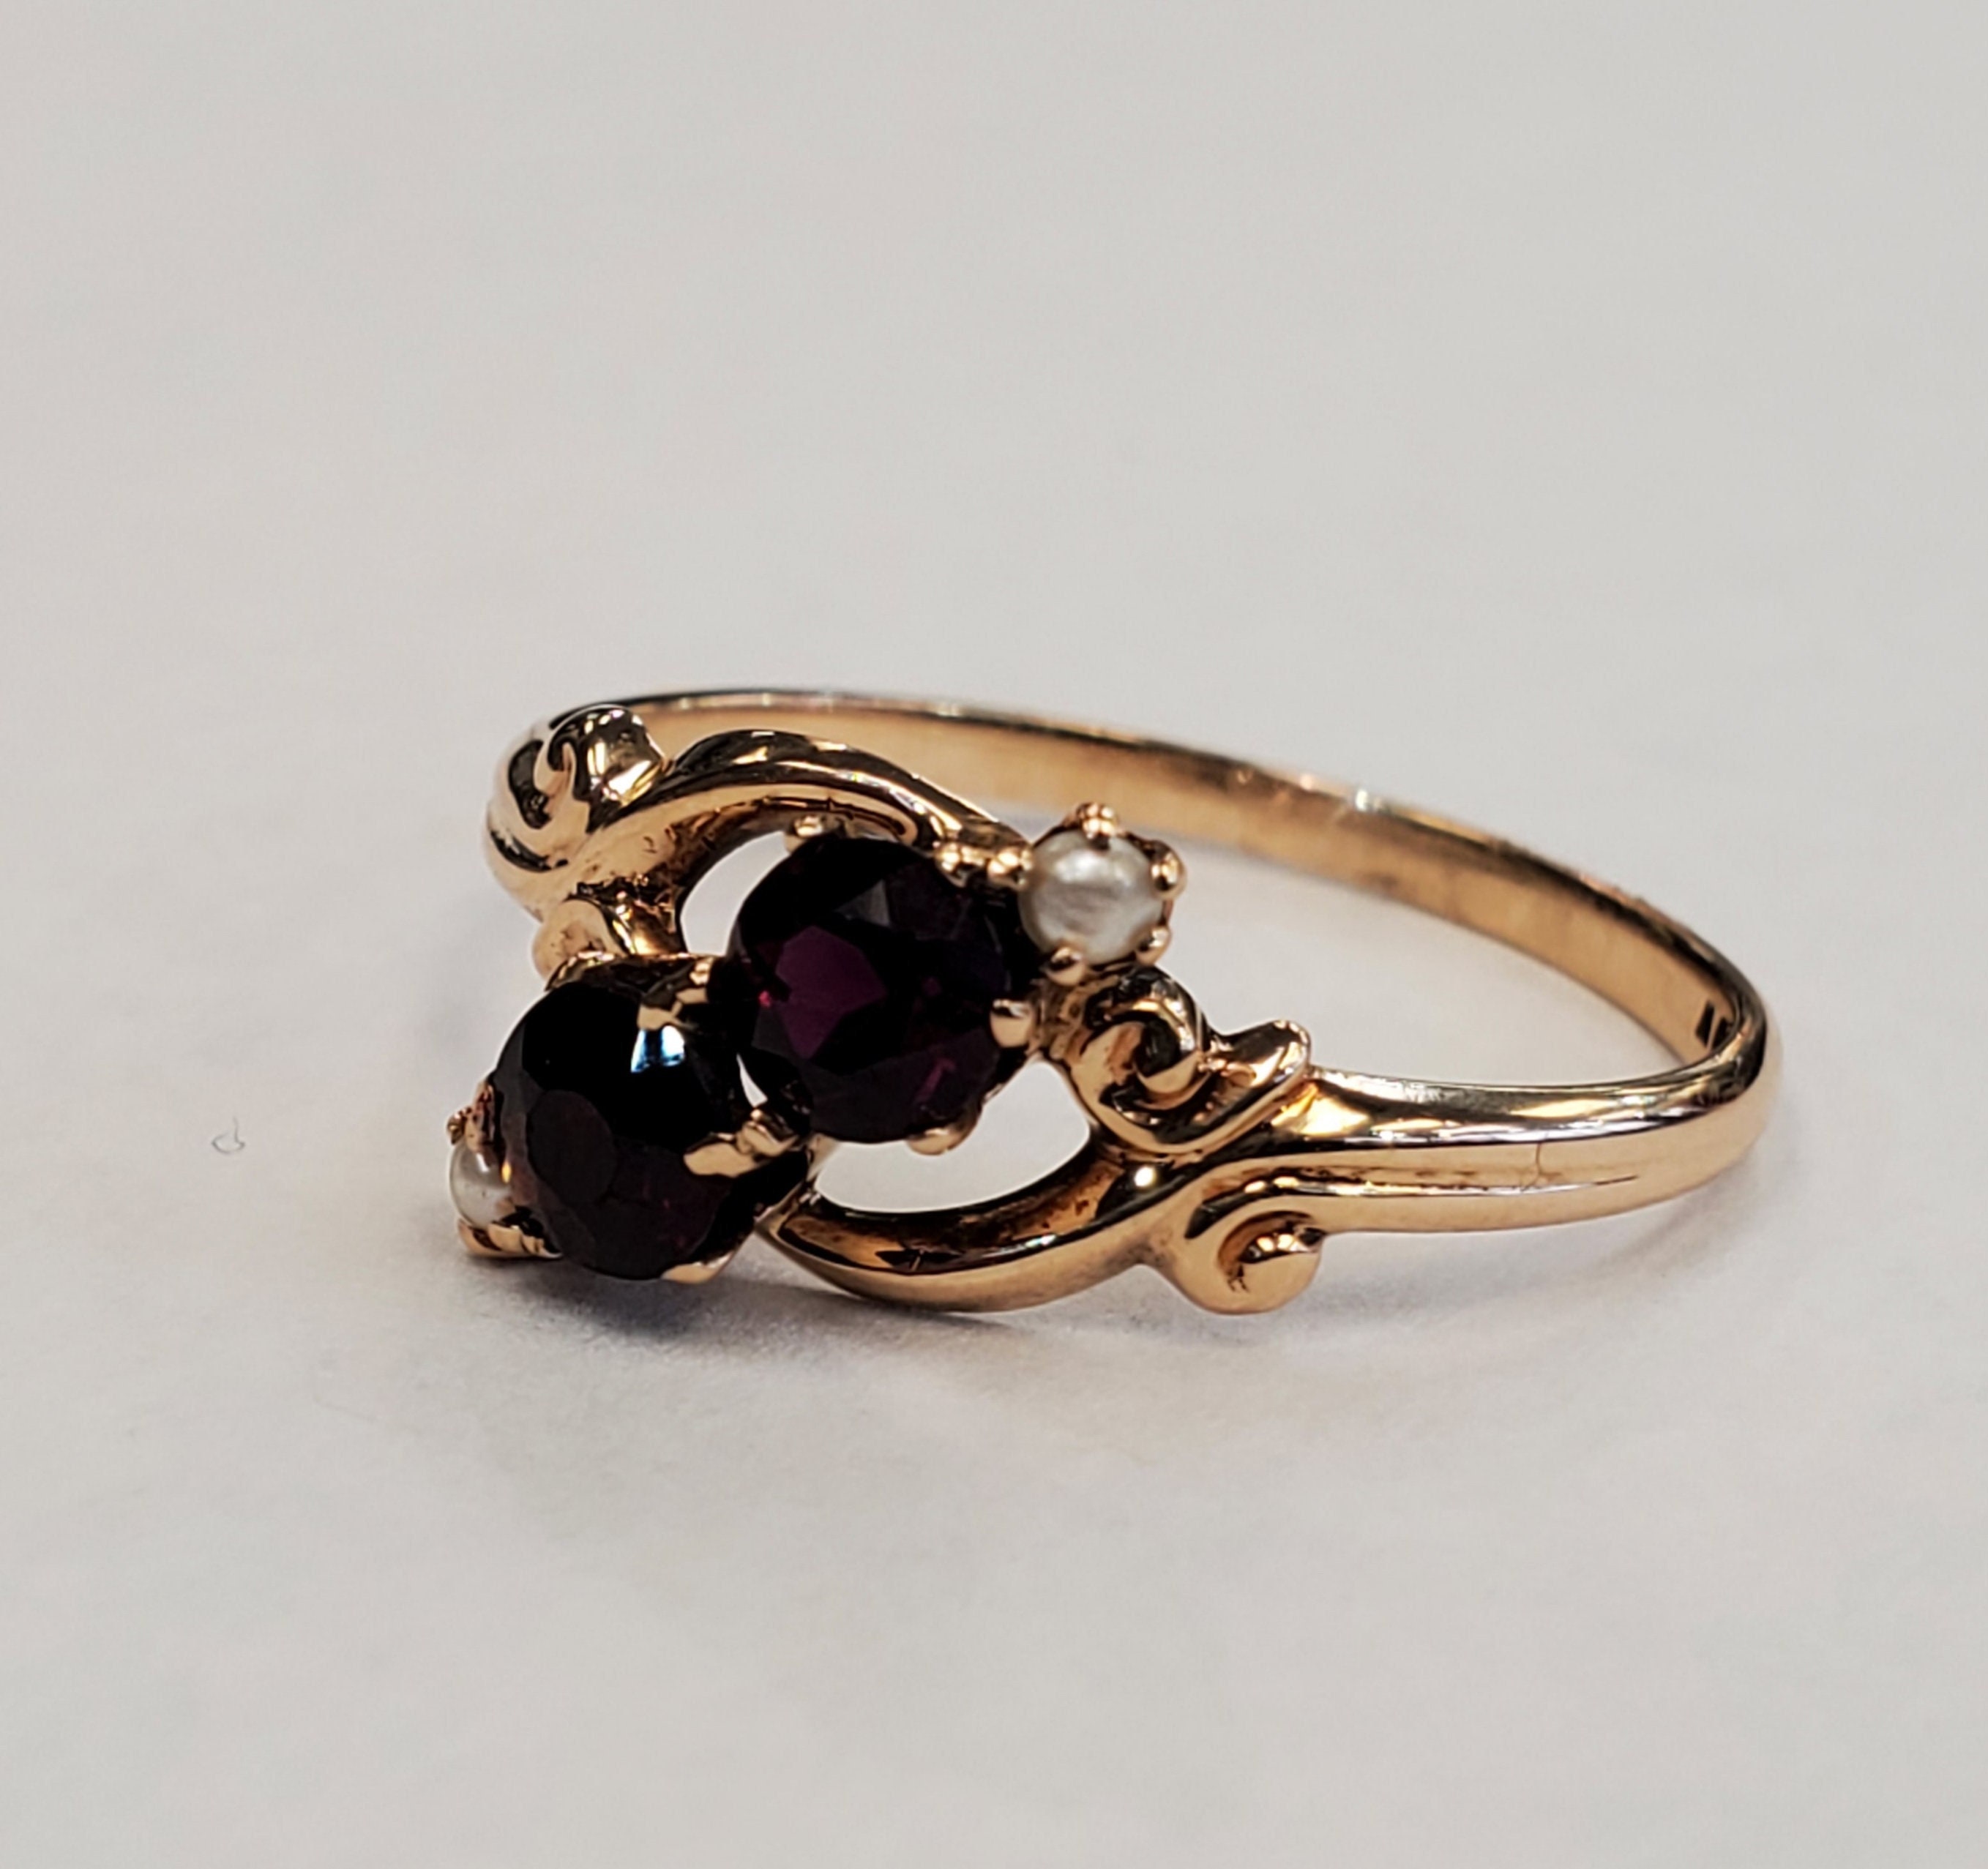 Product Image for Antique White Wile Warner rose cut garnet and seed pearl 10k yellow gold ring